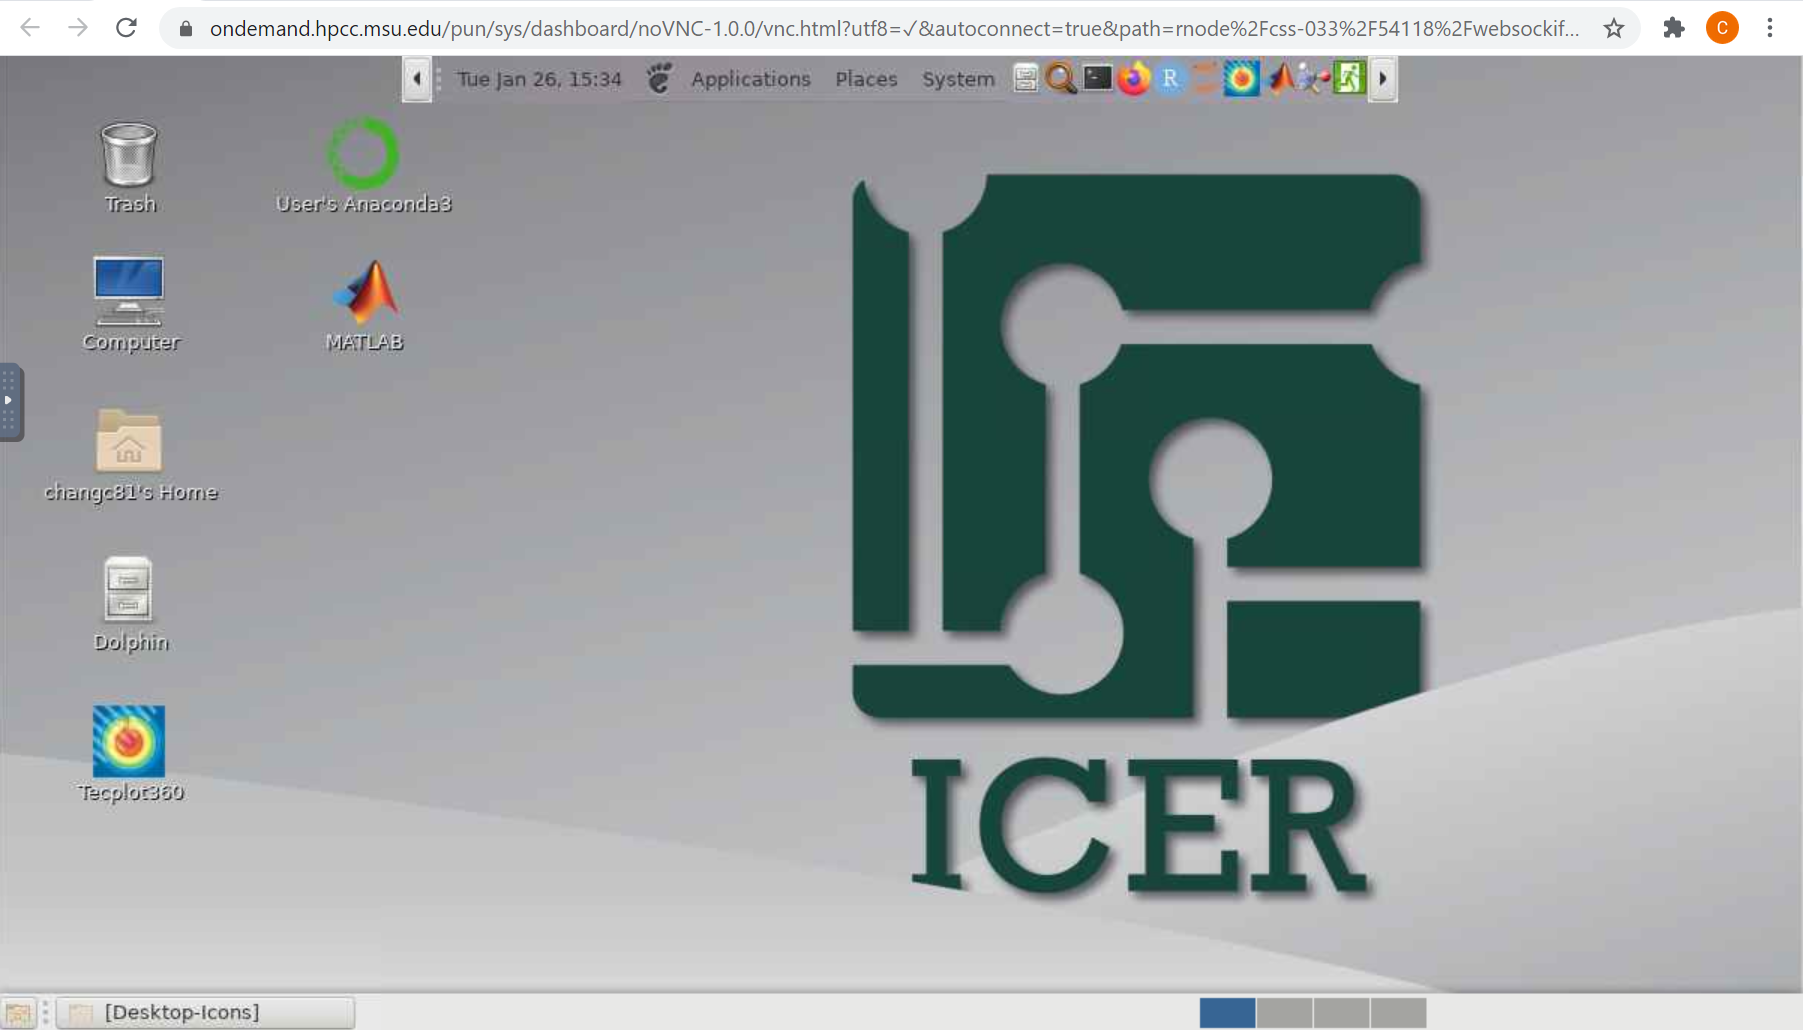 Screenshot of the ICER interactive desktop showing application icons.